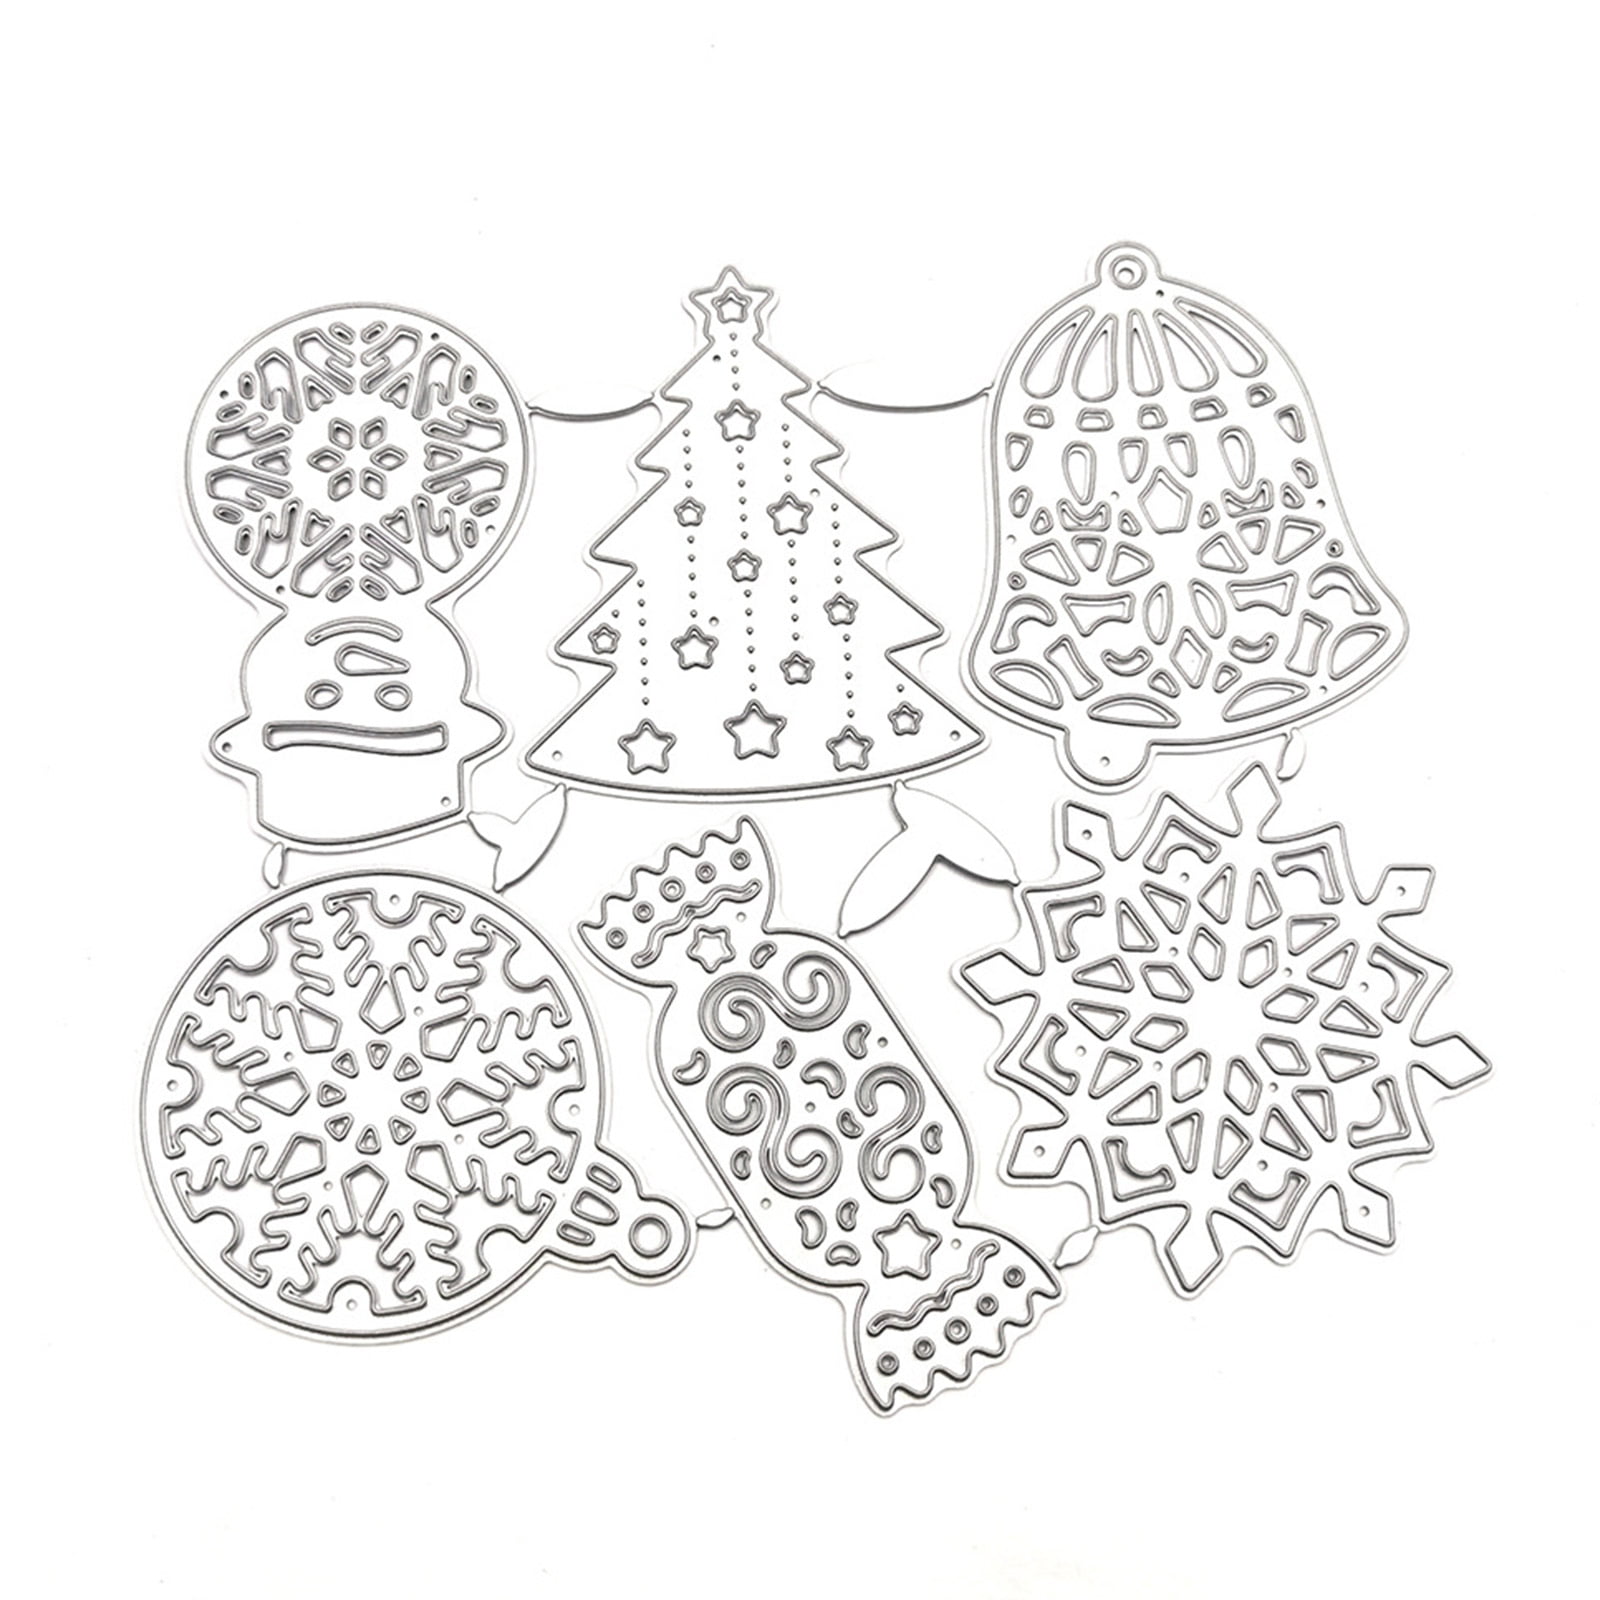 Christmas Metal Cutting Dies Bubble Spotty Line Die Cuts Xmas Paper Craft Embossing Stencils for Card Making DIY Scrapbooking Album Decorative 